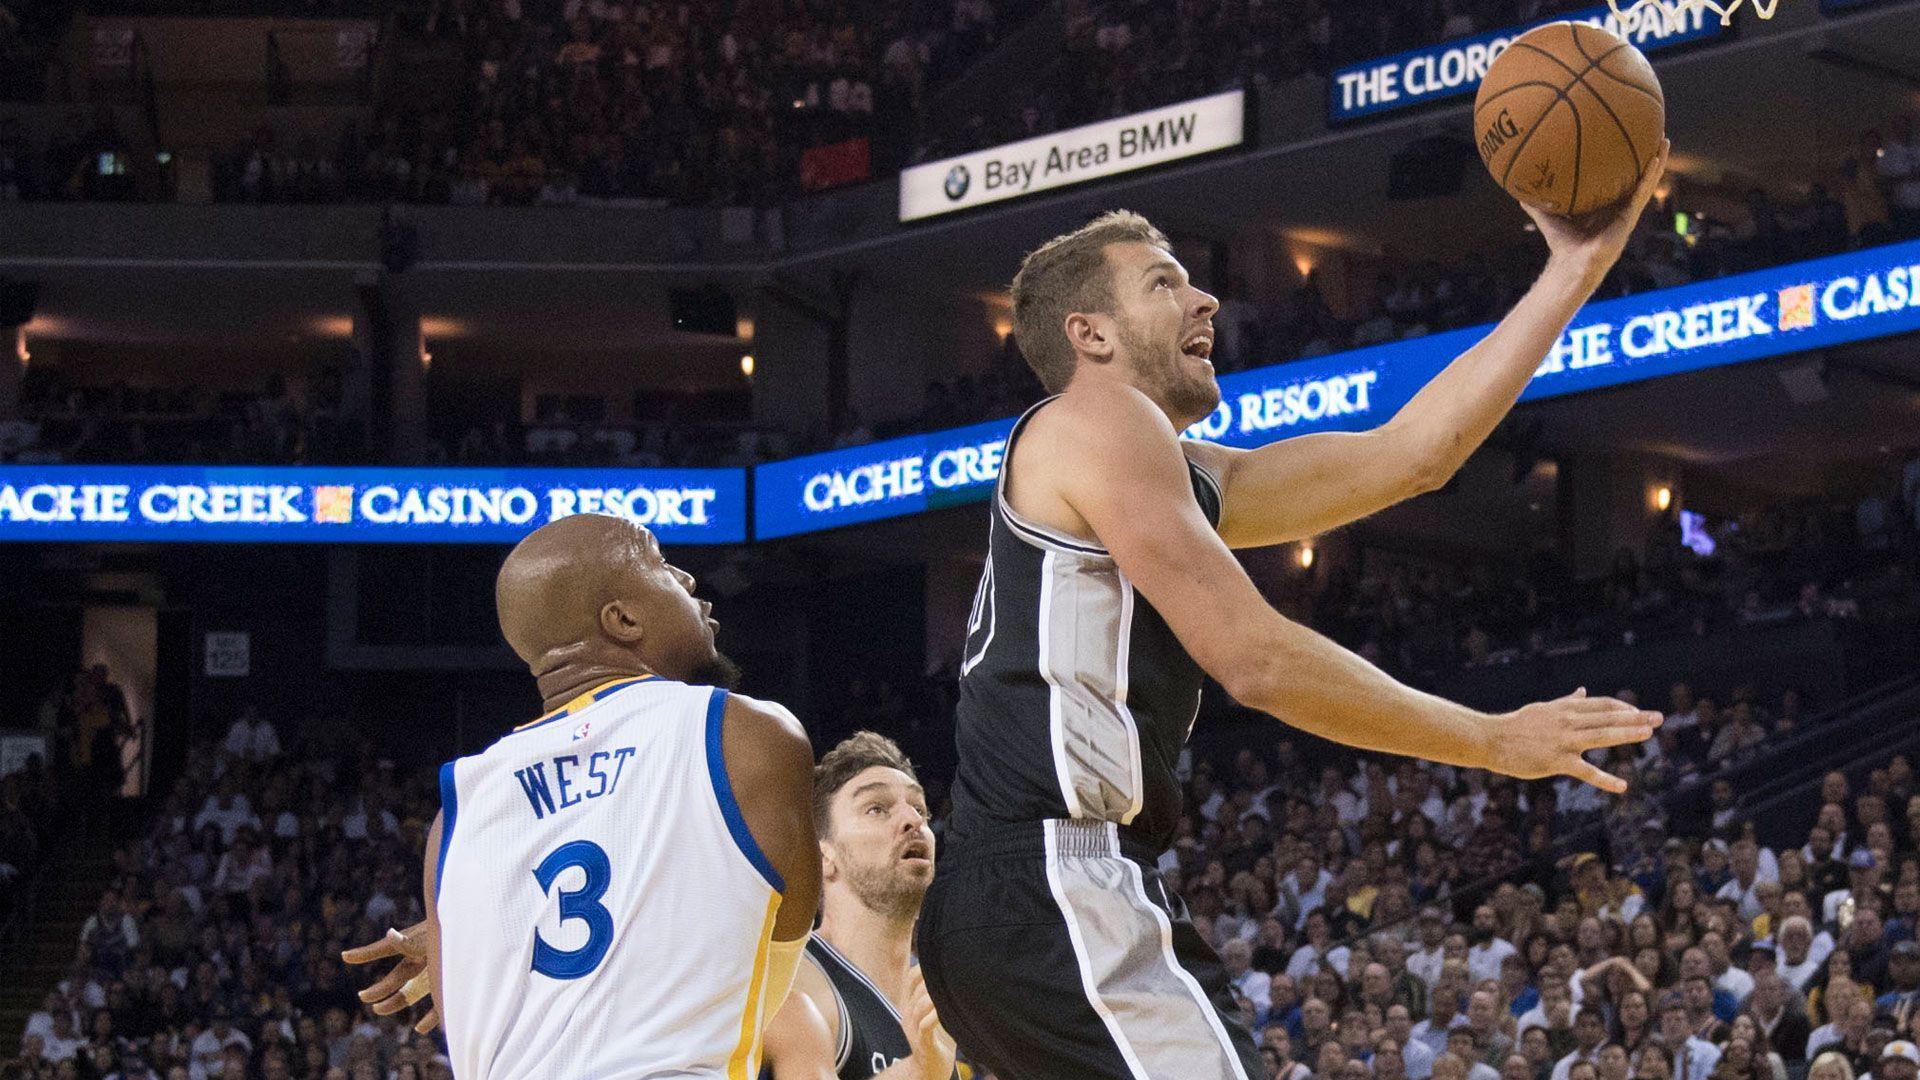 After Spurs loss, Warriors concede it might take time to mesh